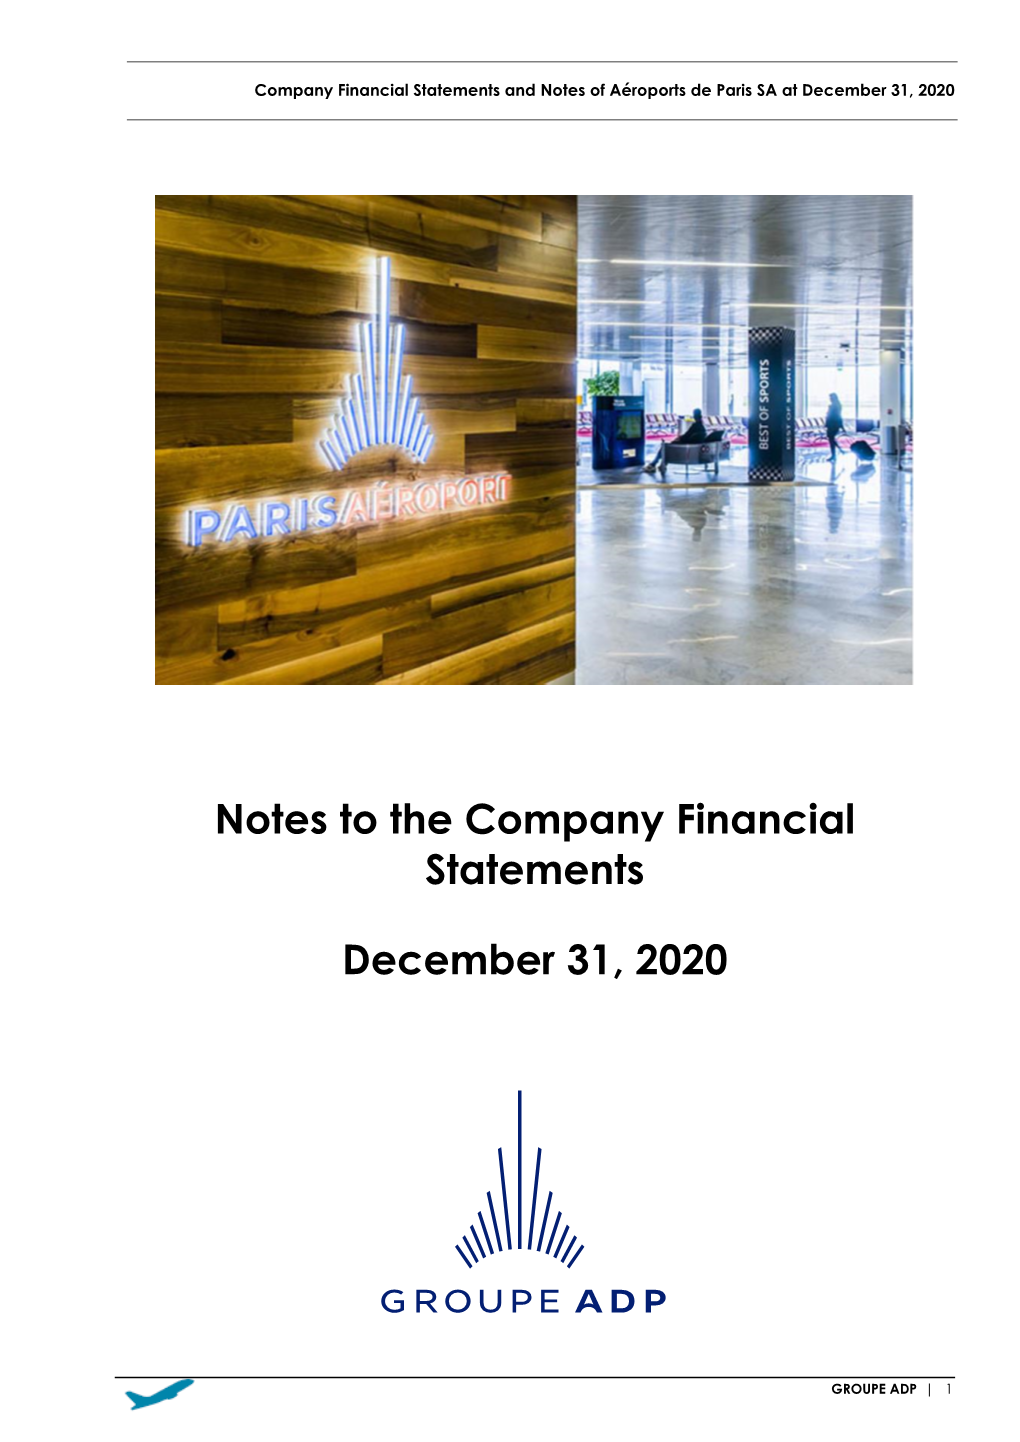 Notes to the Company Financial Statements December 31, 2020